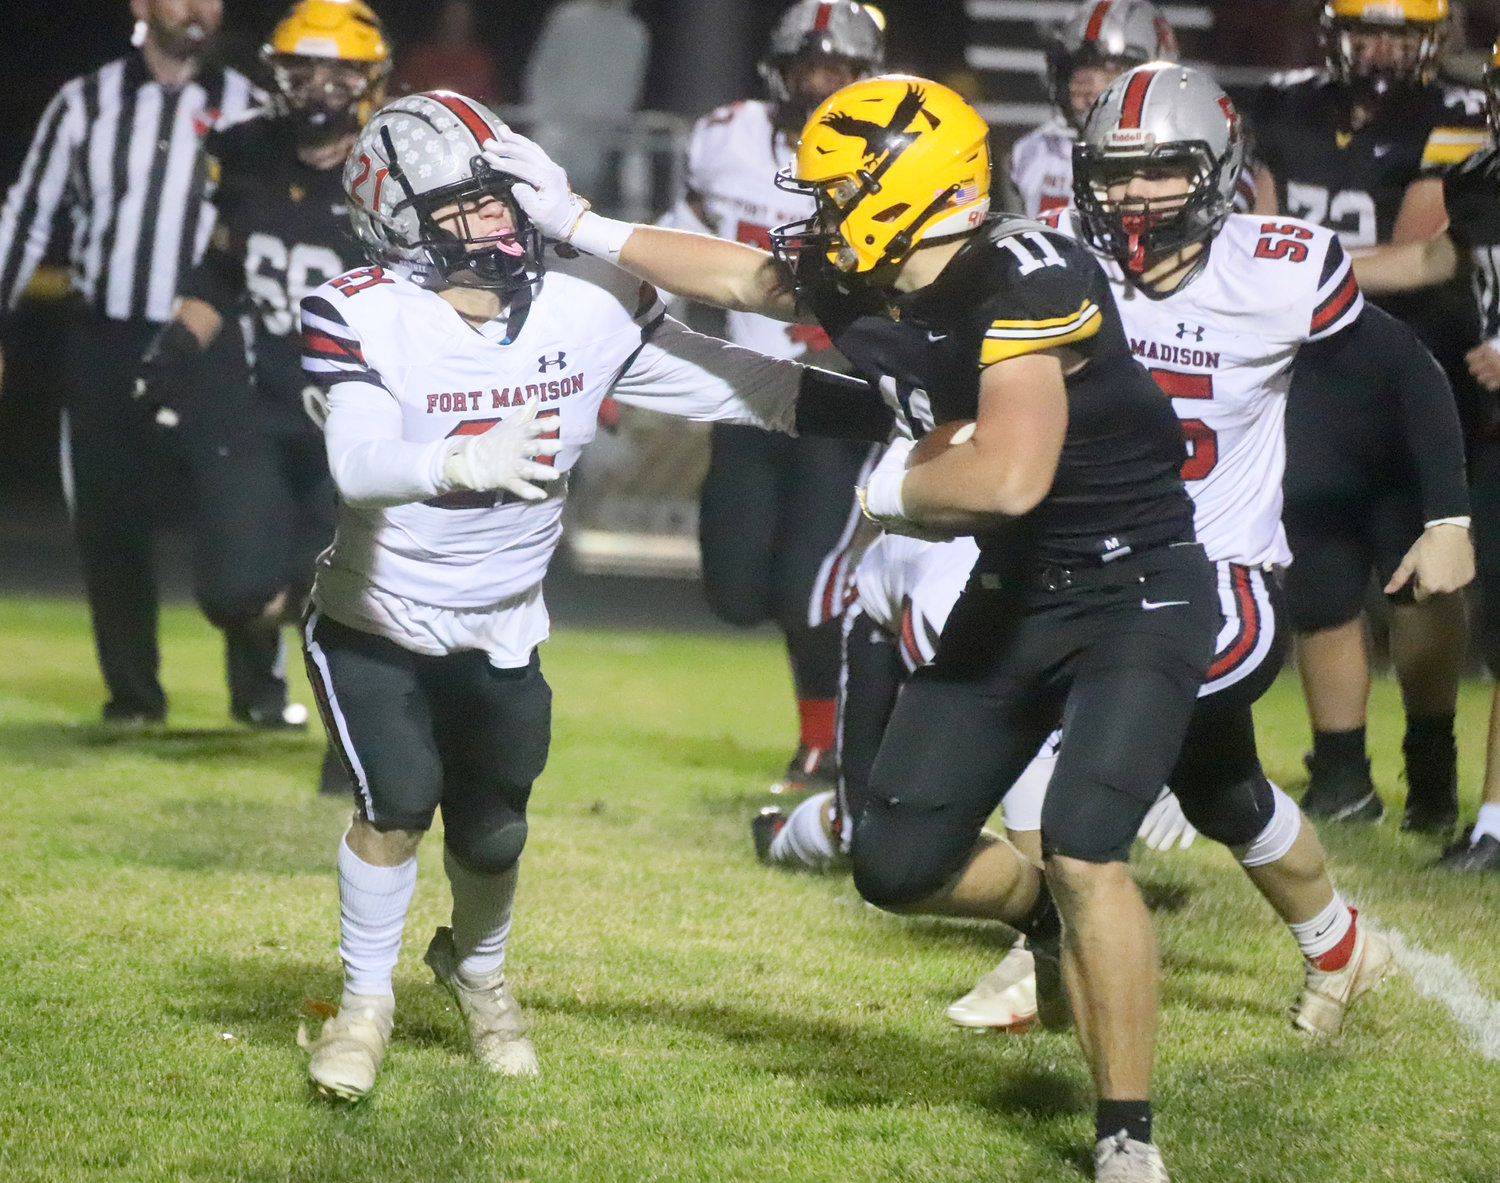 The Go-Hawks' Tyler Gayer stiff arms Fort Madison's Kane Williams on a run early in the first quarter Friday night in Waverly.